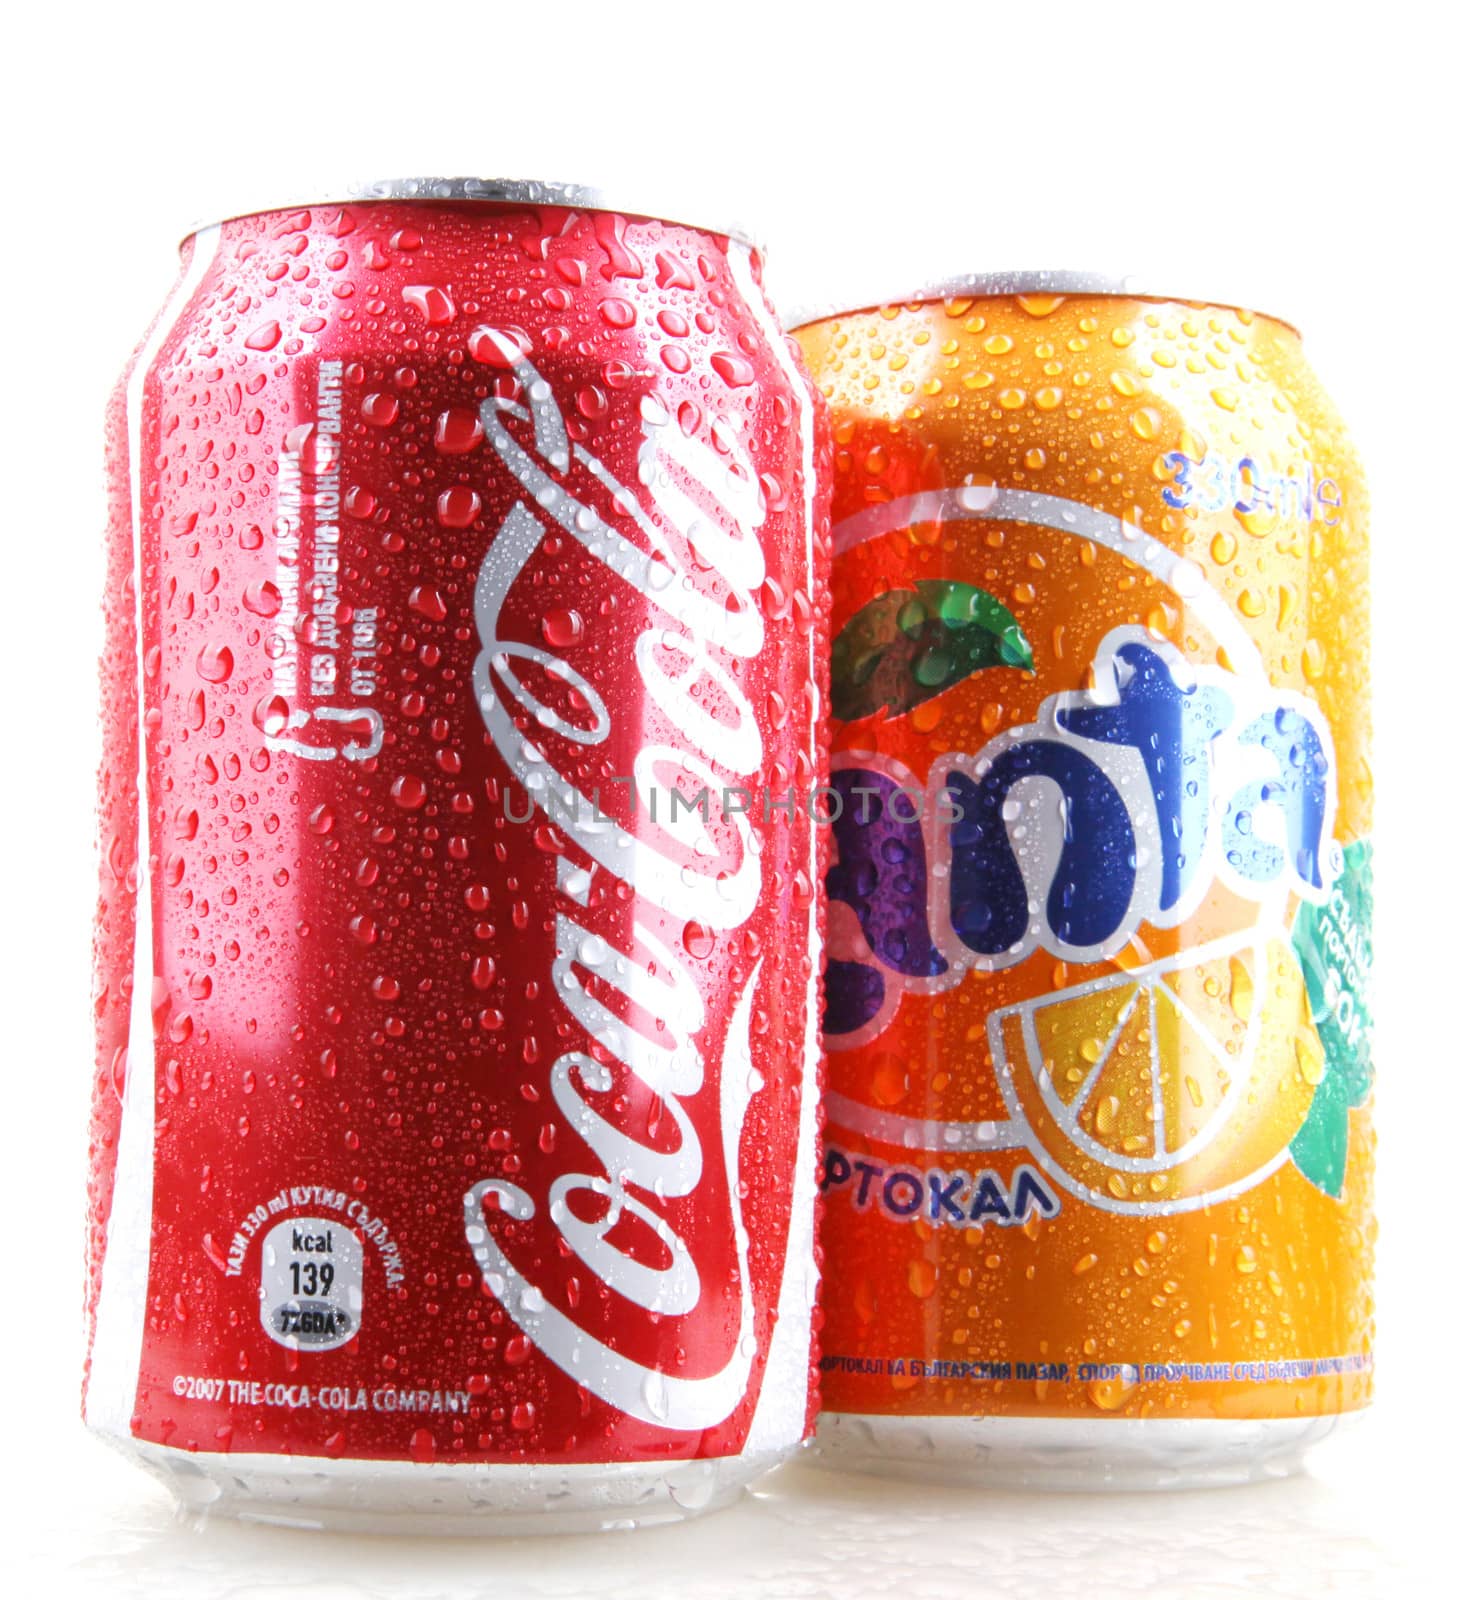 AYTOS, BULGARIA - JANUARY 25, 2014: Global brand of fruit-flavored carbonated soft drinks created by The Coca-Cola Company.